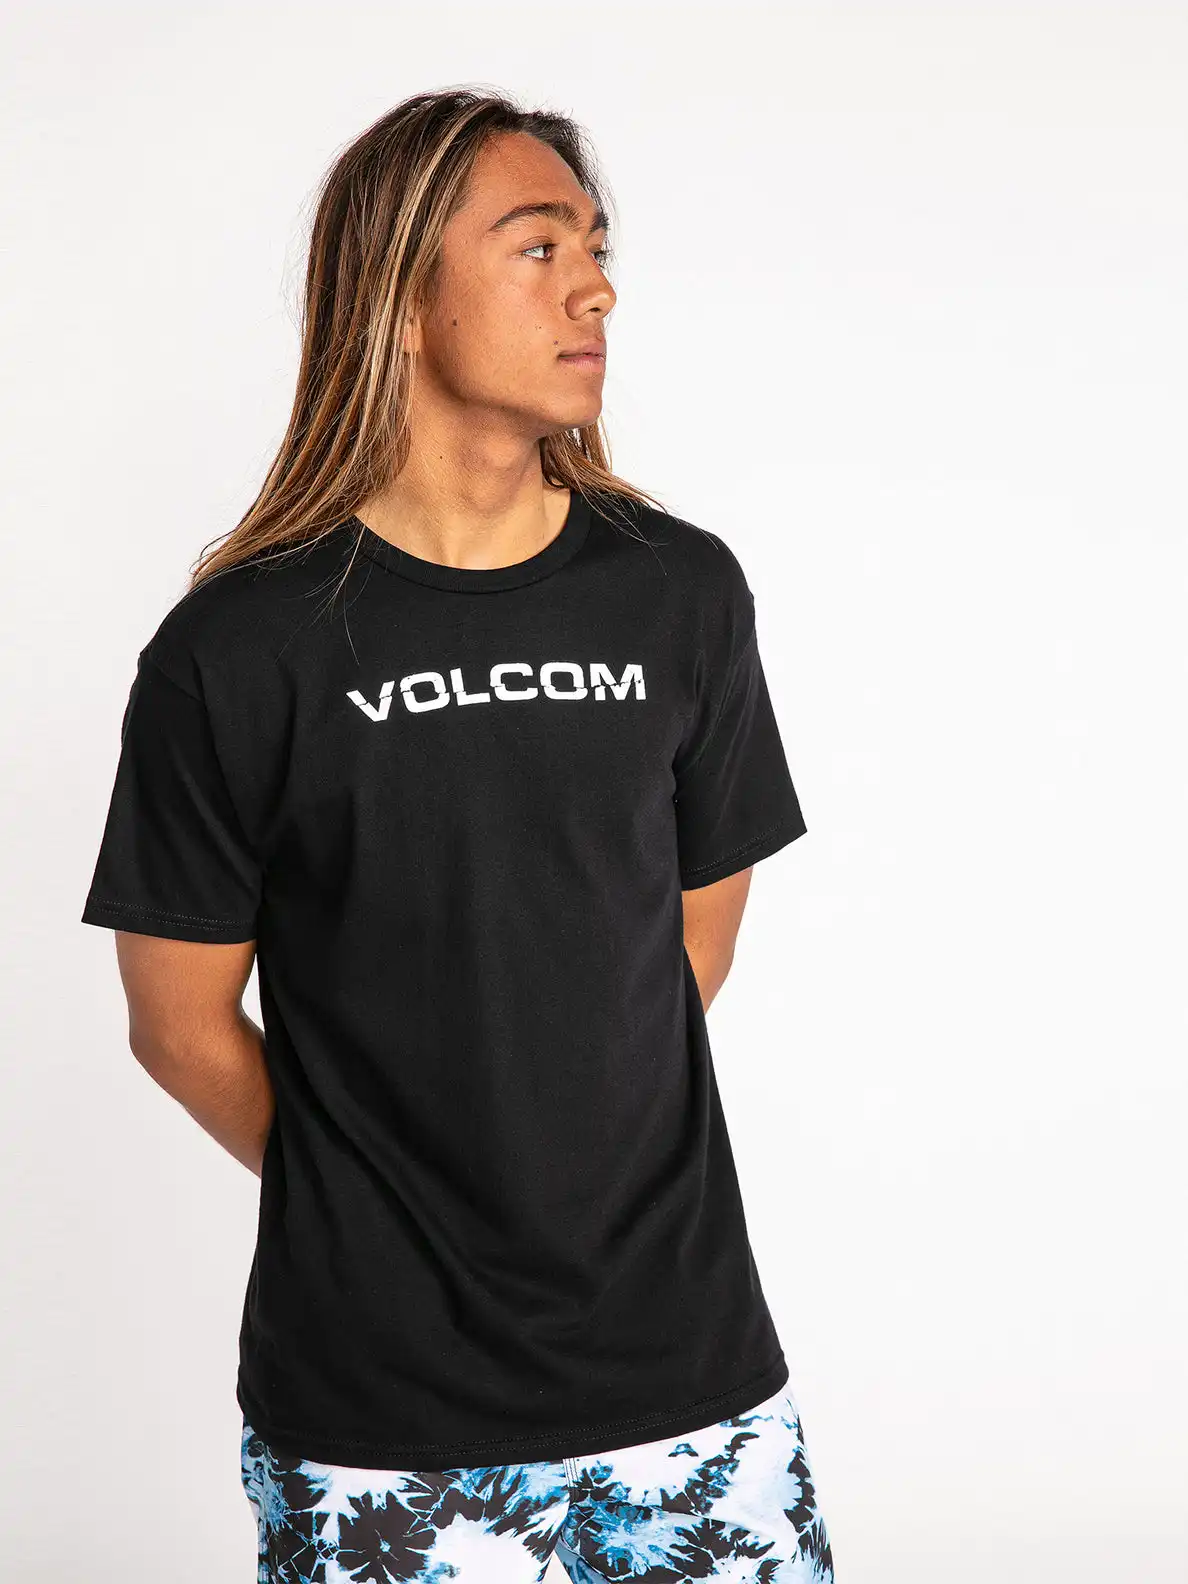 Volcom Extra 50% Off Sitewide: Men's Rippeuro Short Sleeve Tee